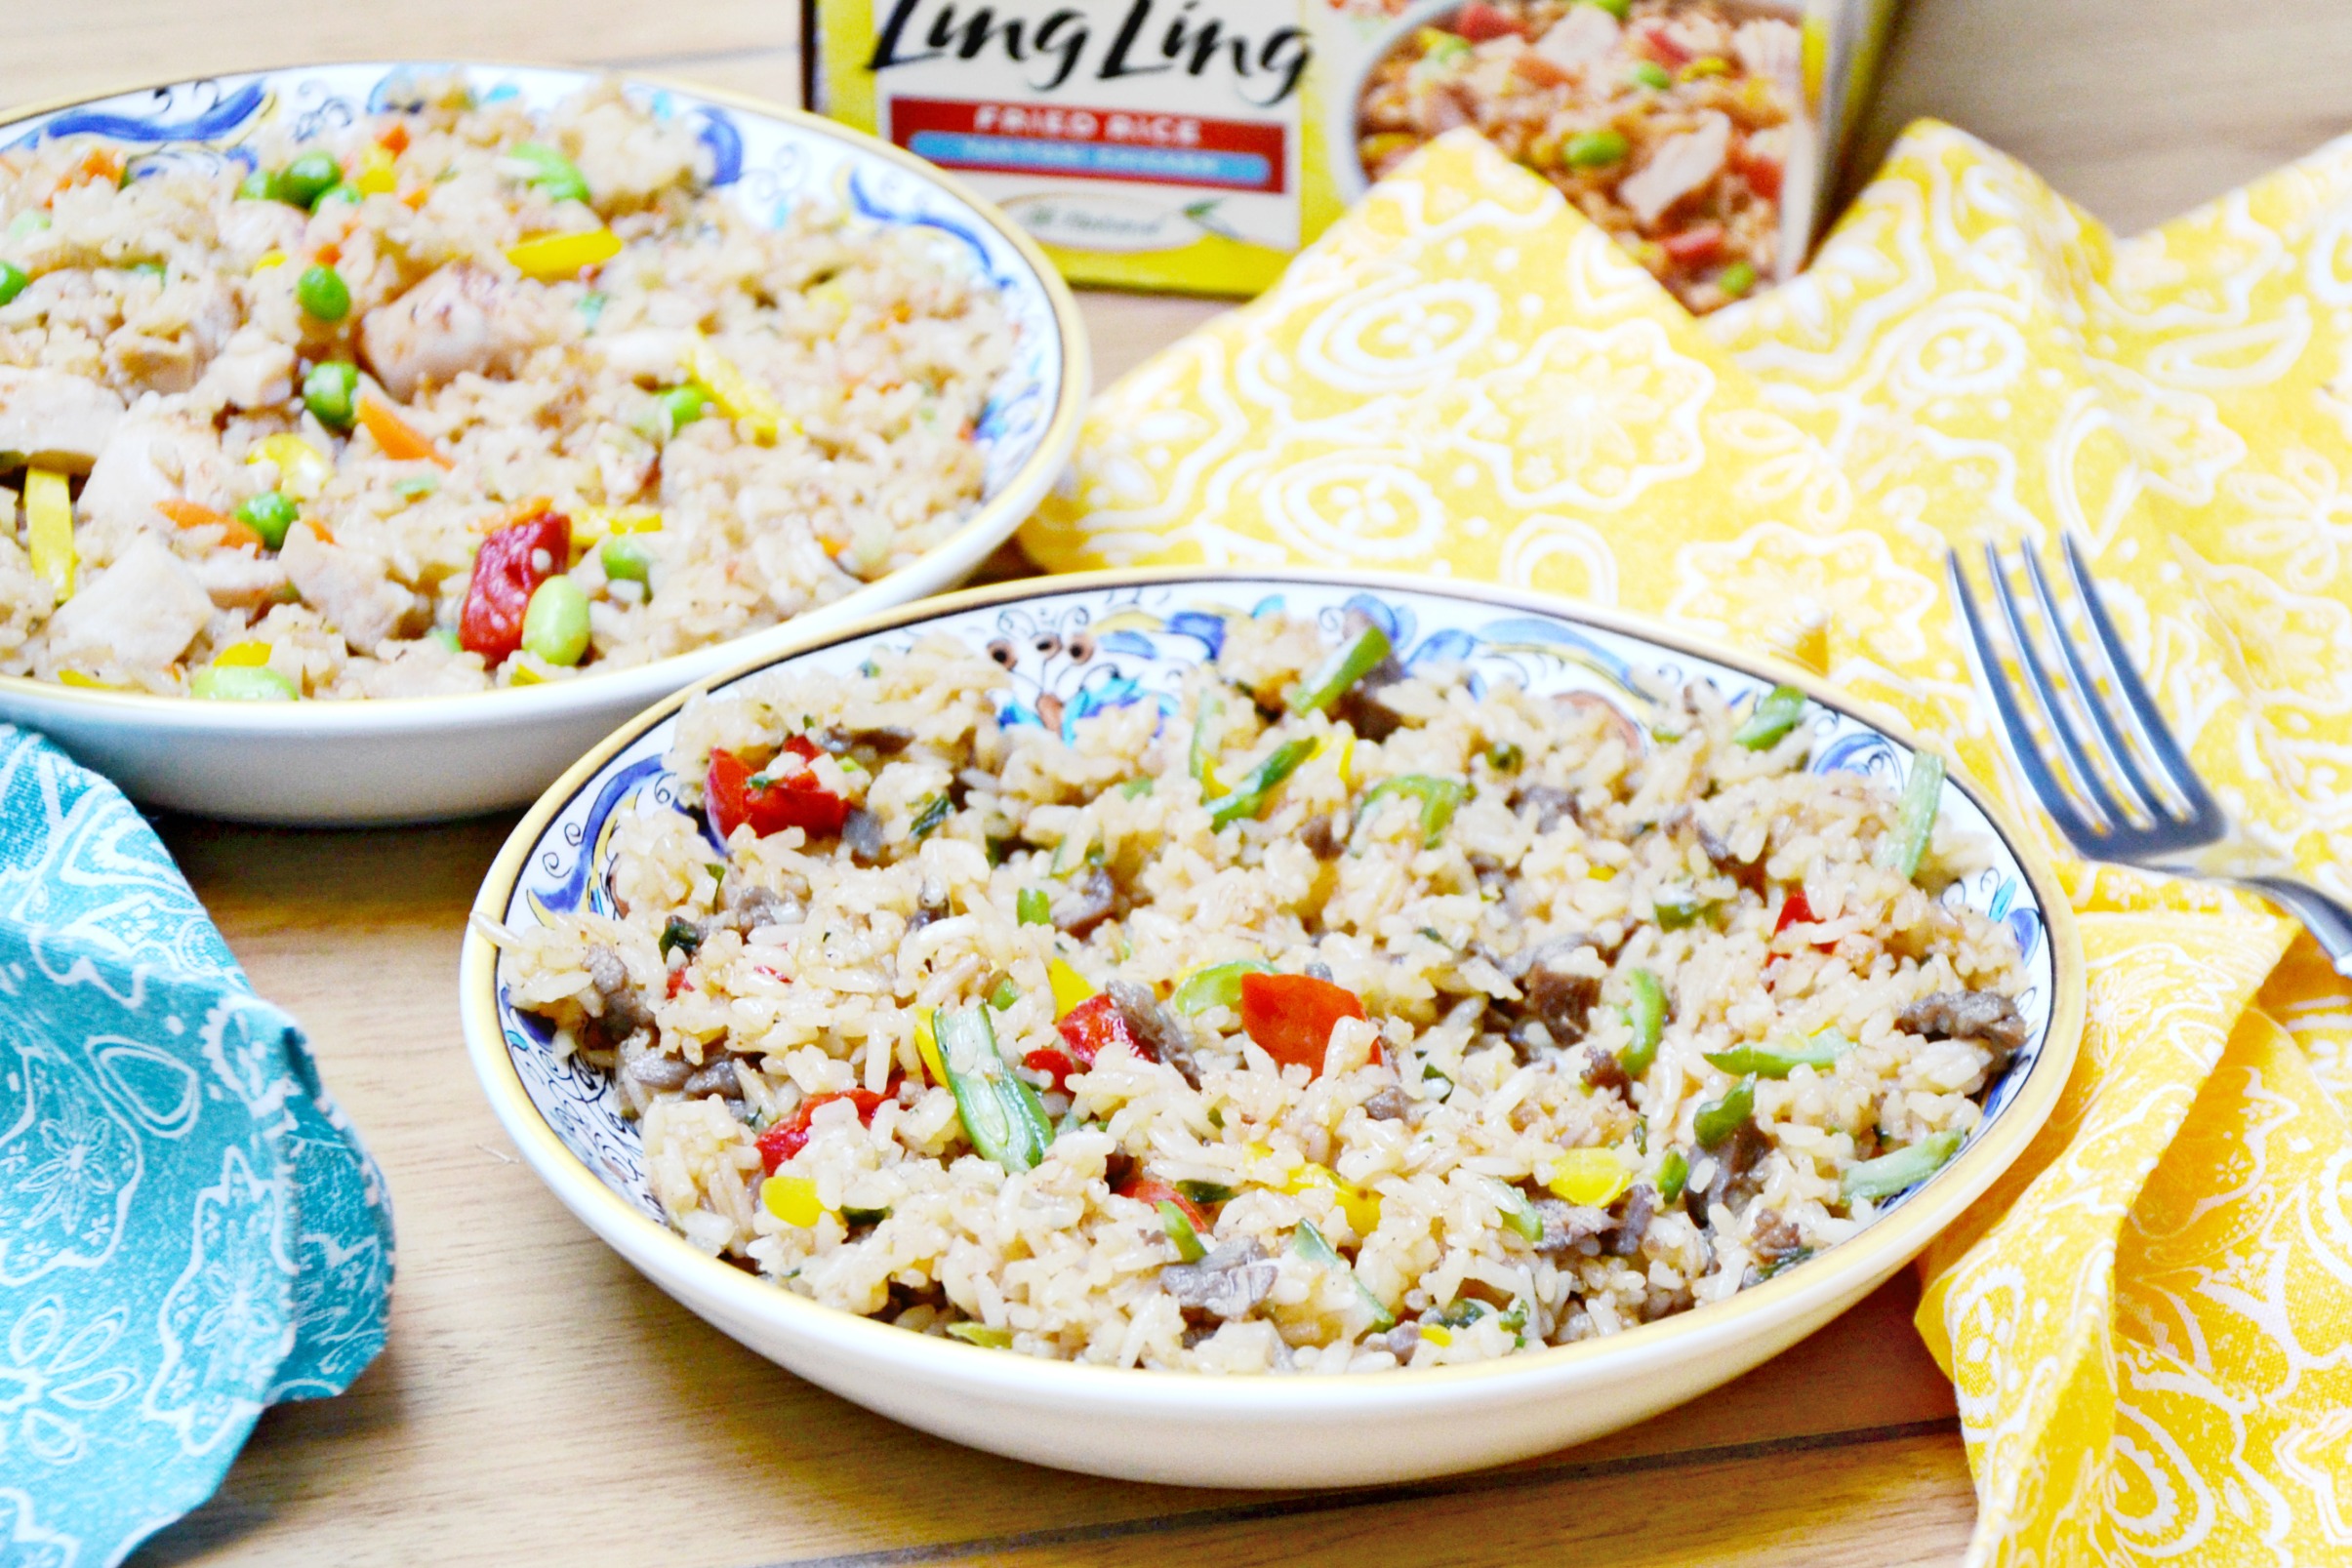 Ling Ling Fried Rice easy family meals are perfect for the busiest summer days with restaurant quality meals prepared quickly at home.